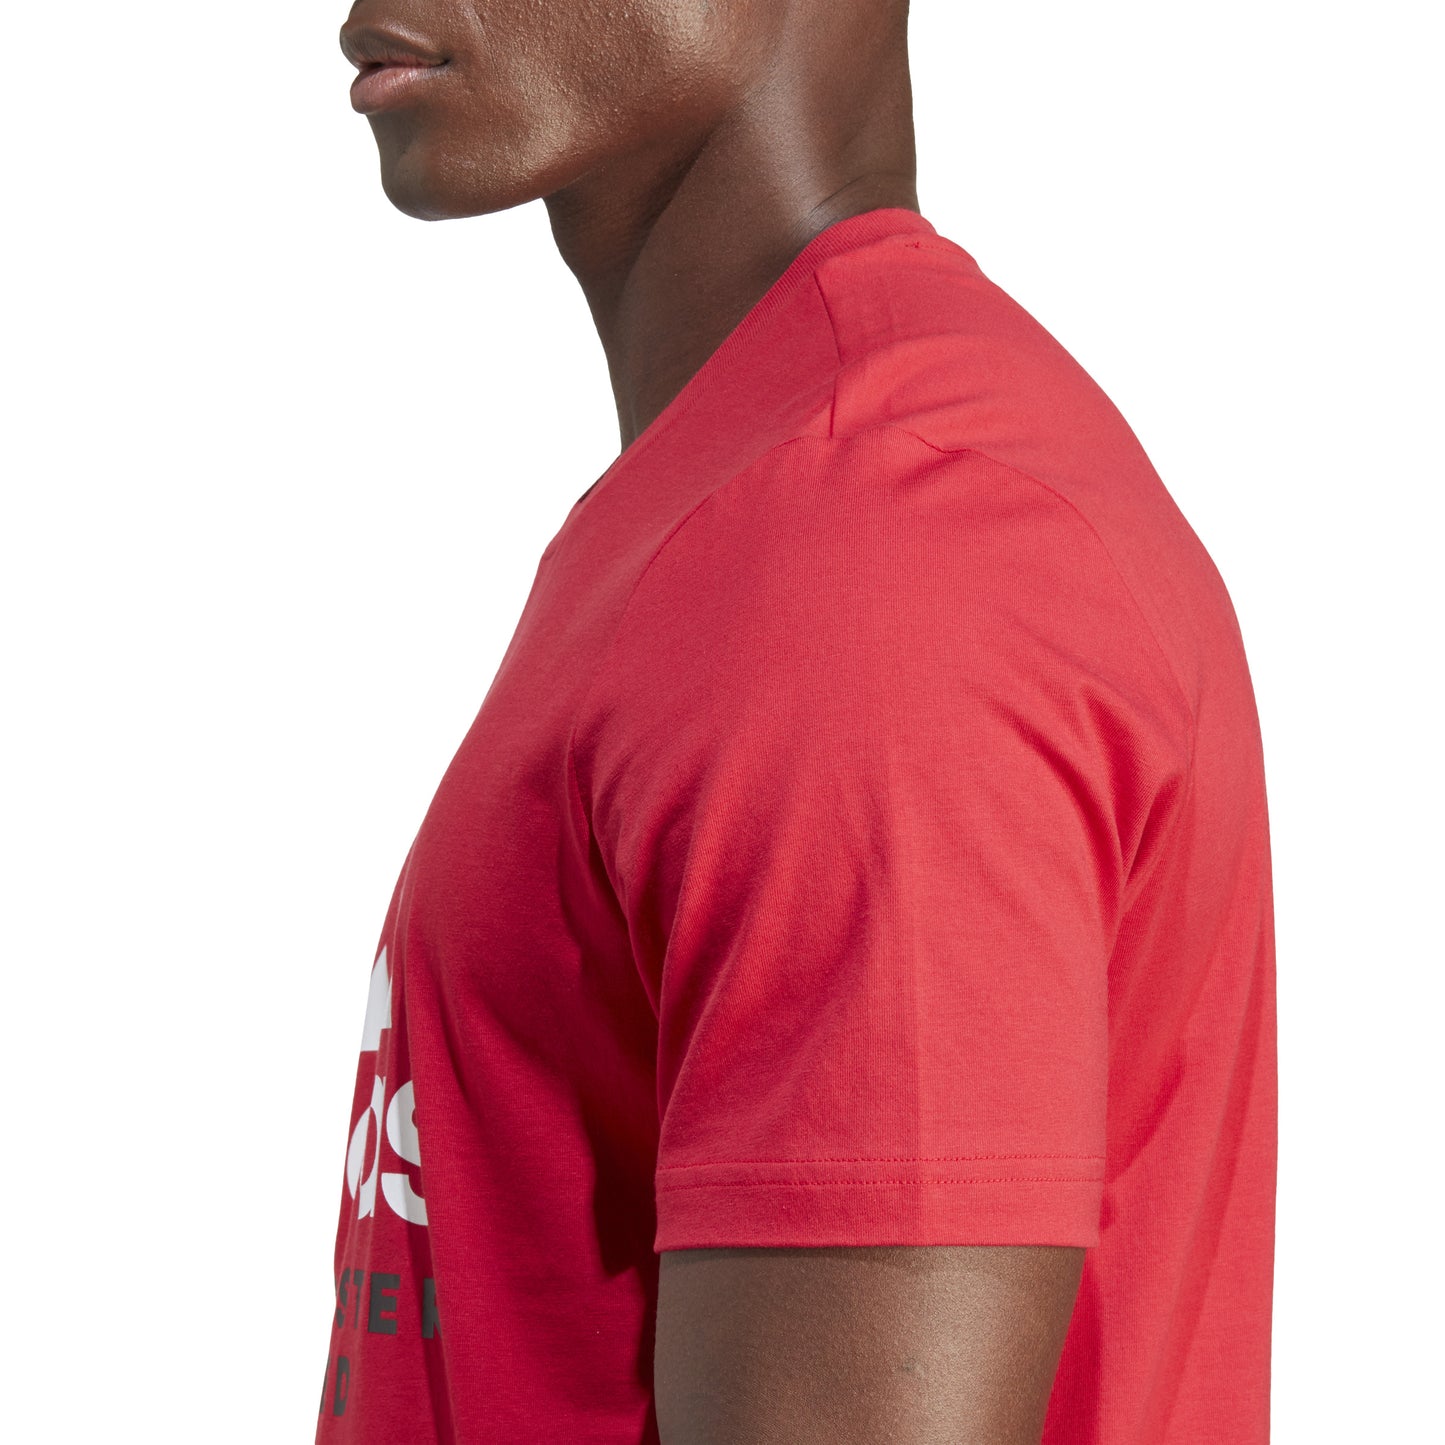 Adidas Manchester United DNA Tee